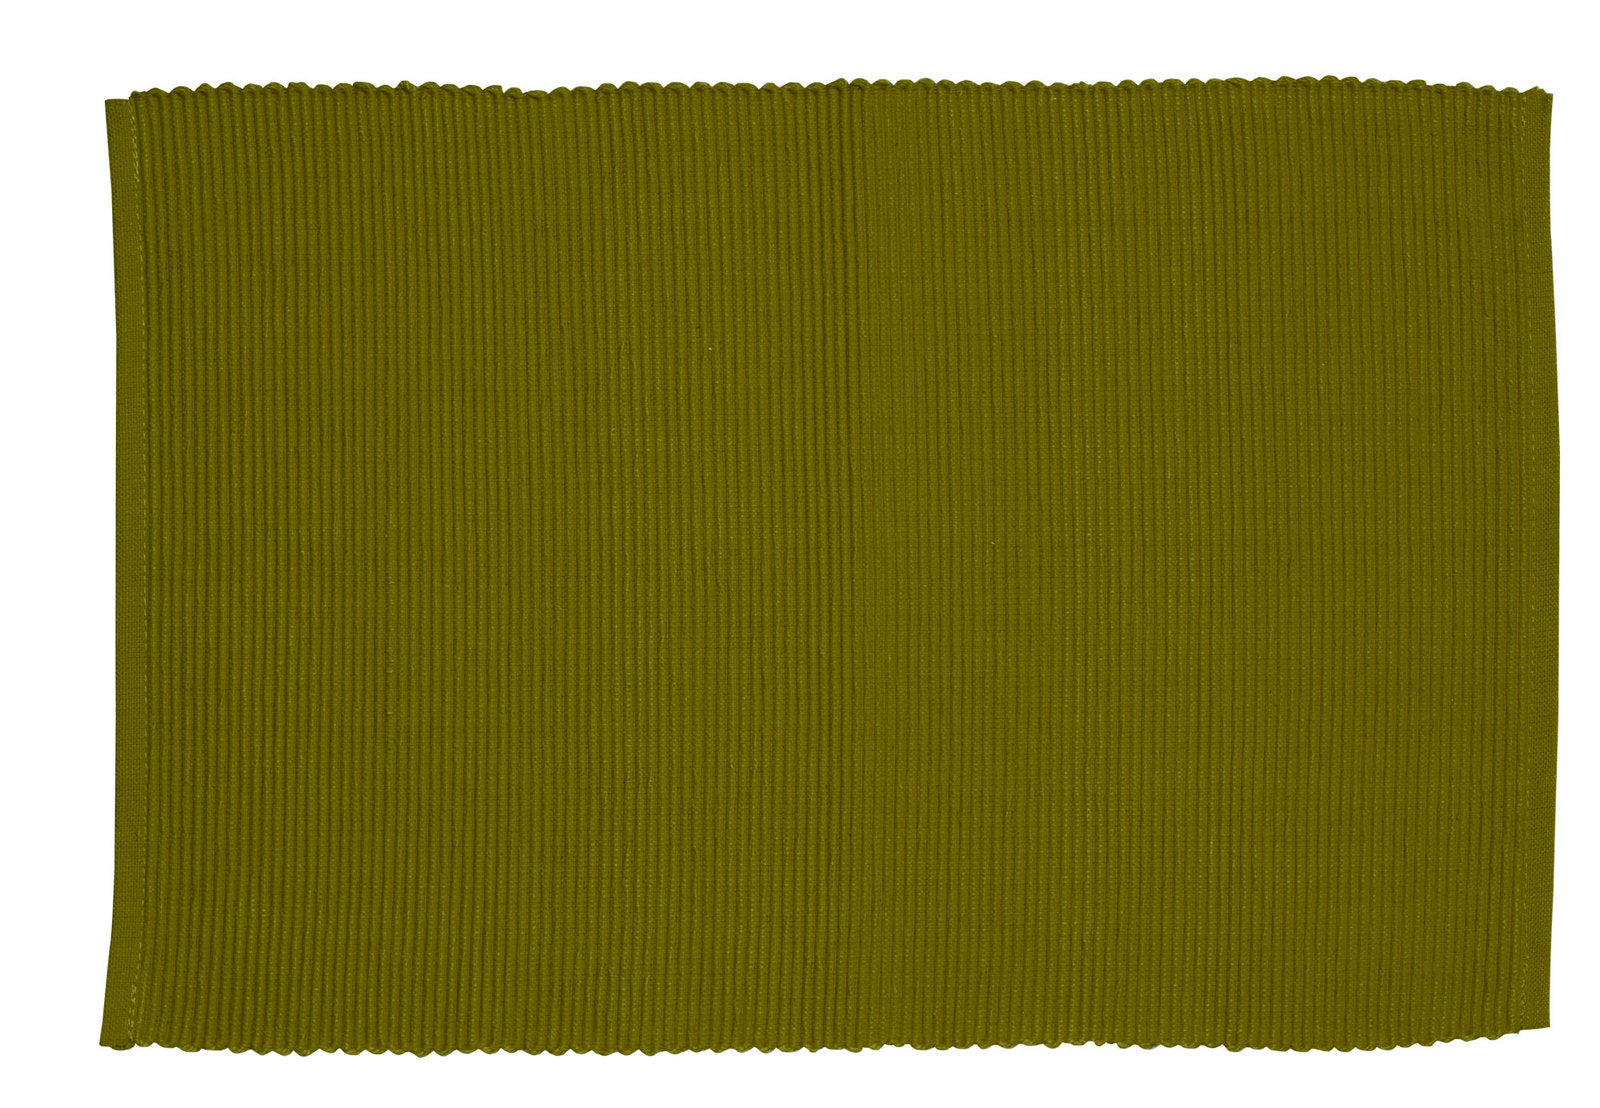 Lollipop Ribbed Placemat - 33 cm x 48 cm (set of 6) in Olive